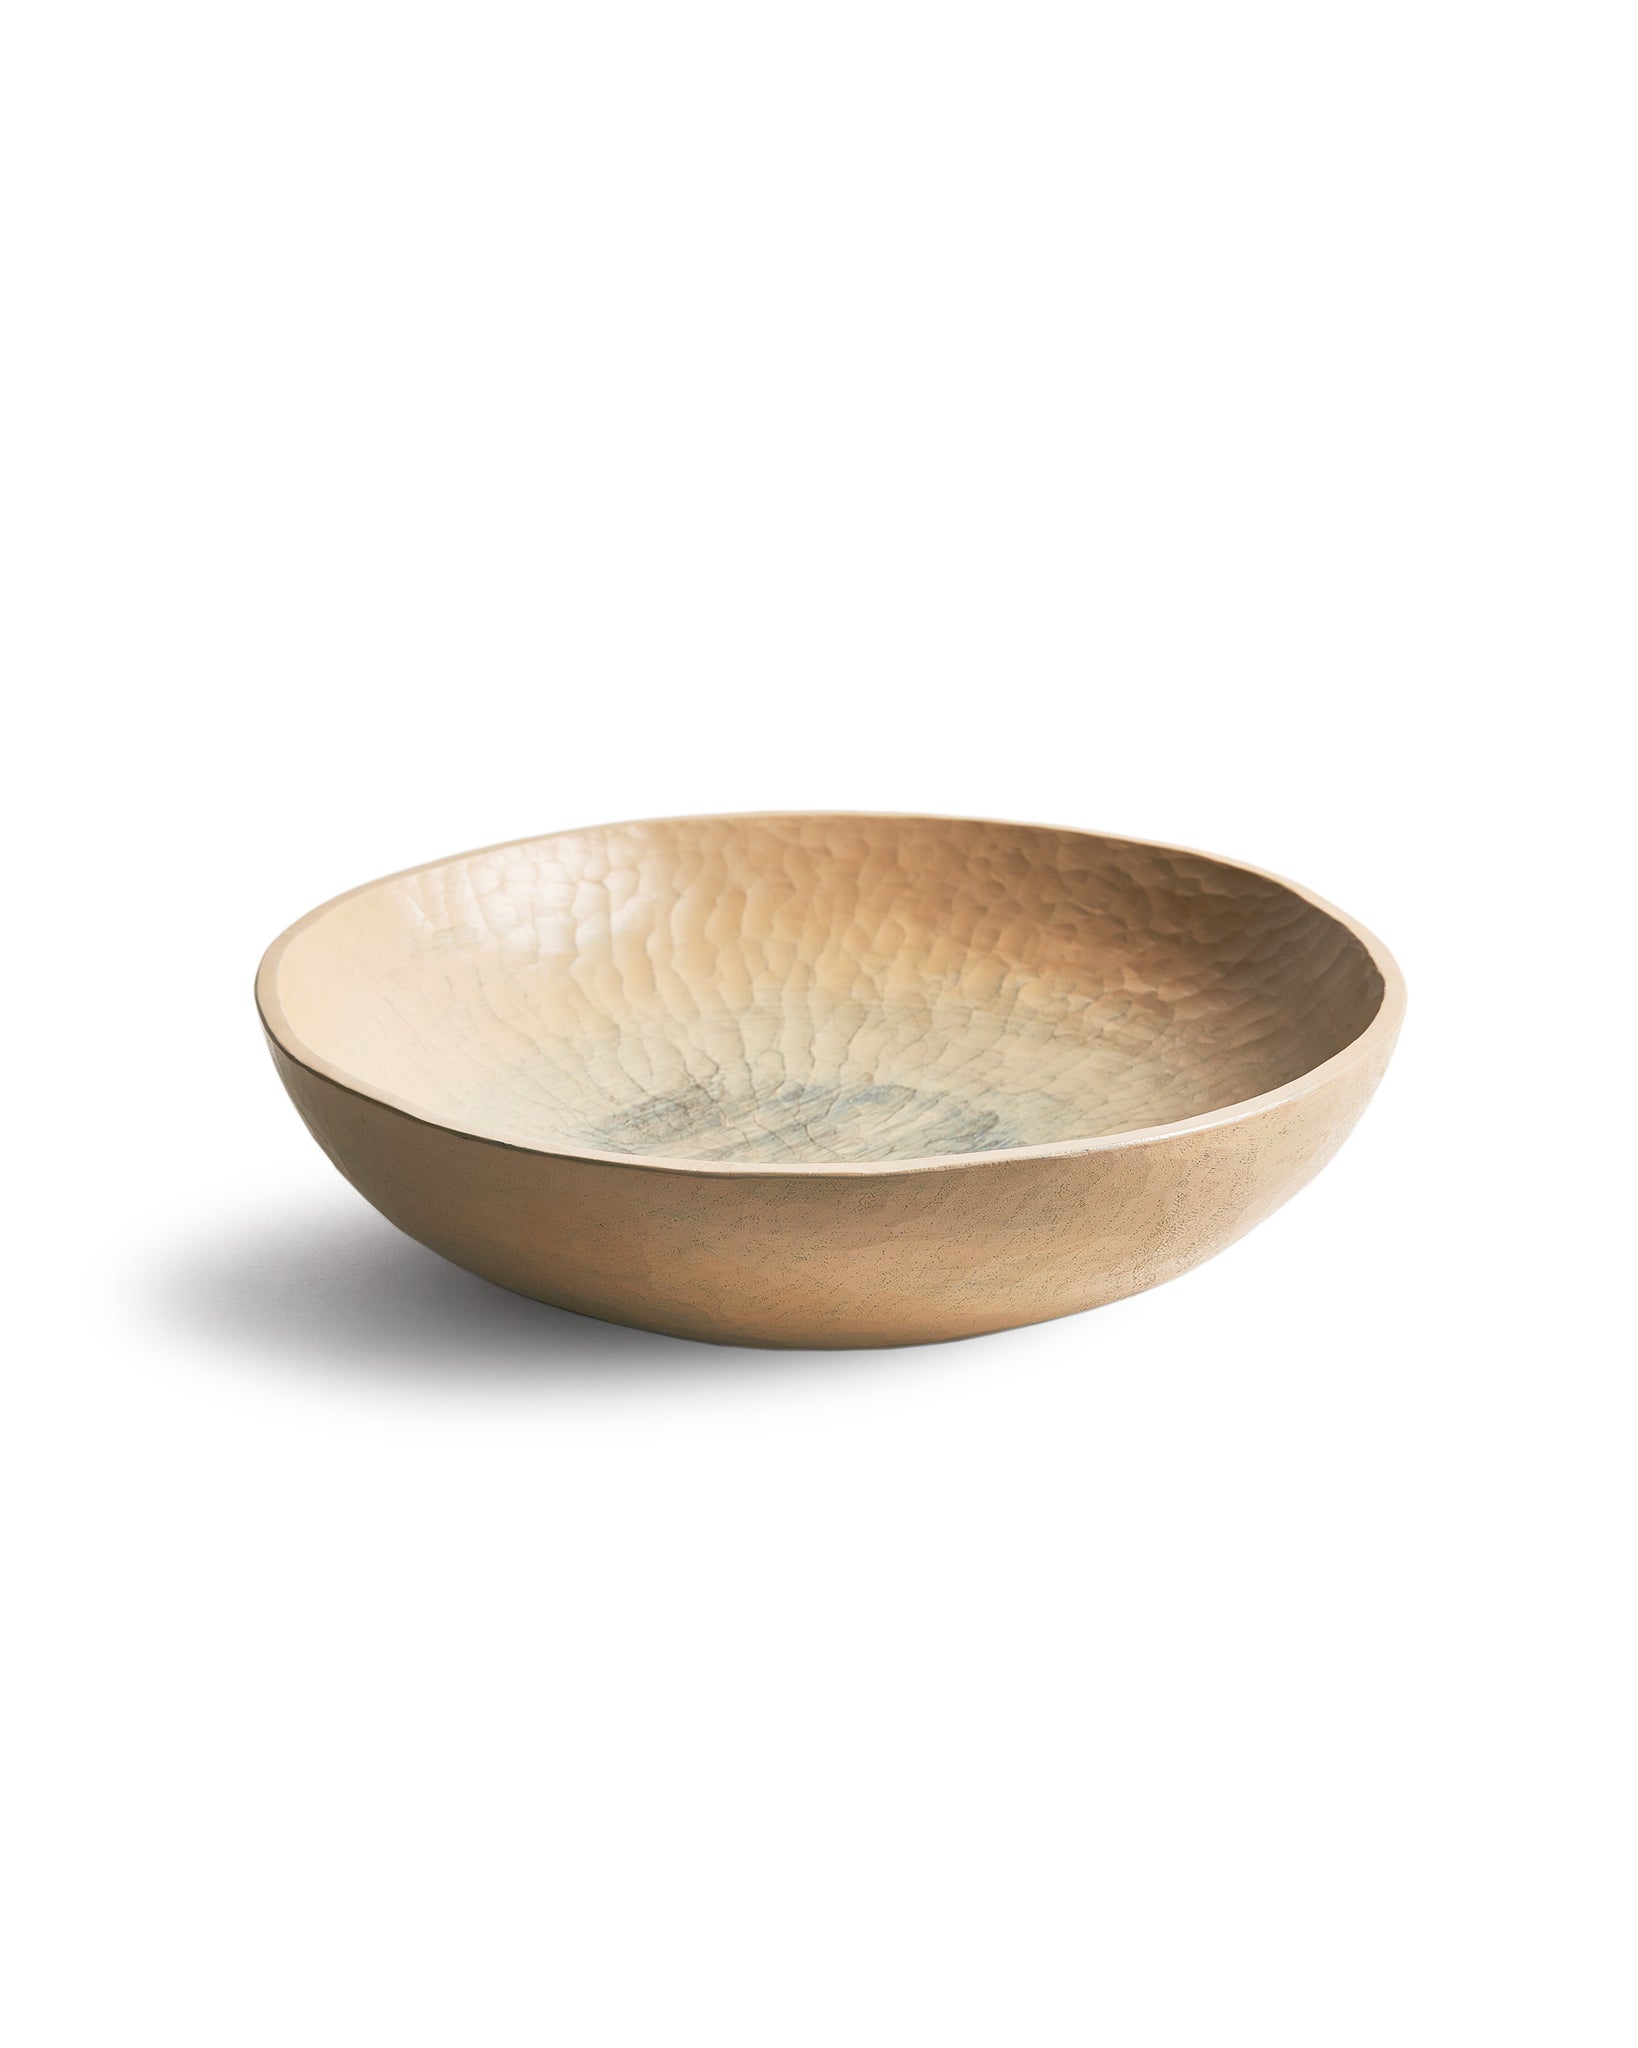 Zoomed out front view of Large White Urushi Walnut Carved Bowl by Ryuji Mitani against white background.